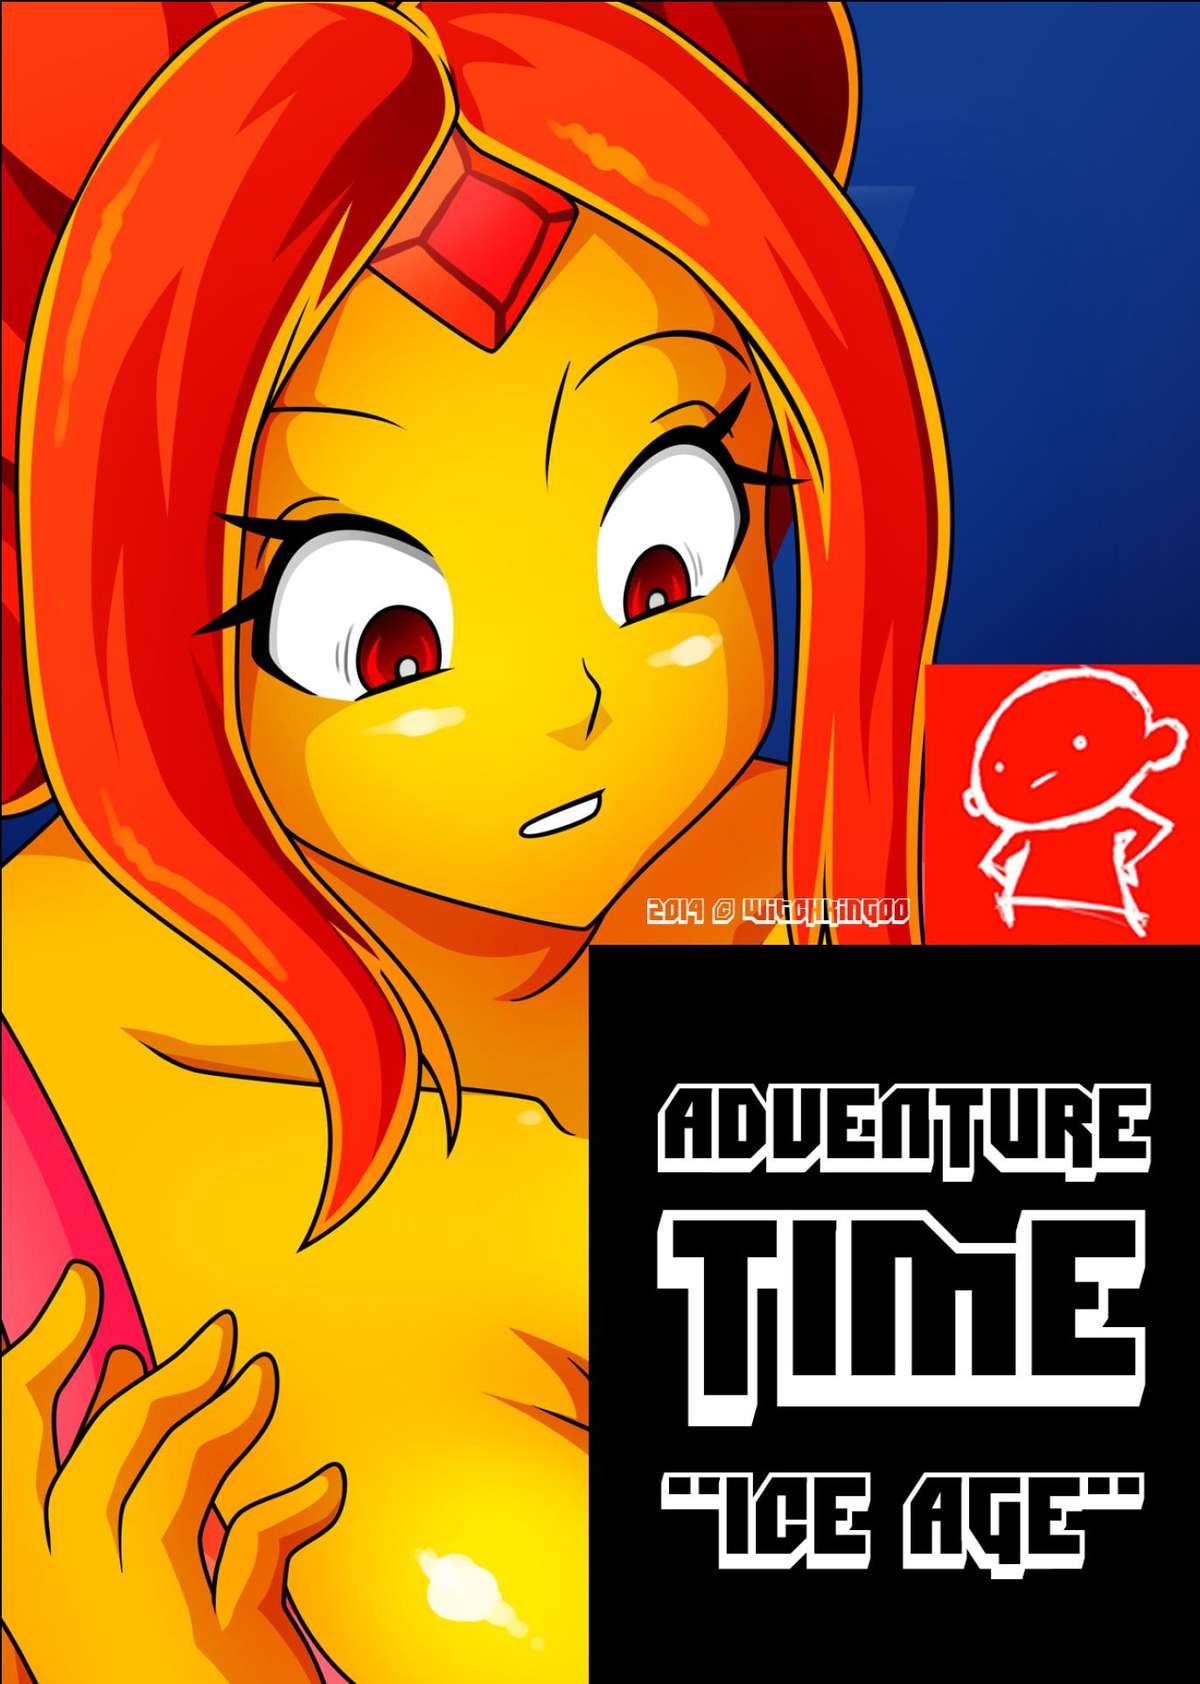 Adventure Time Shemale Xxx - Witchking00 - Adventure Time Ice Age â€¢ Free Porn Comics